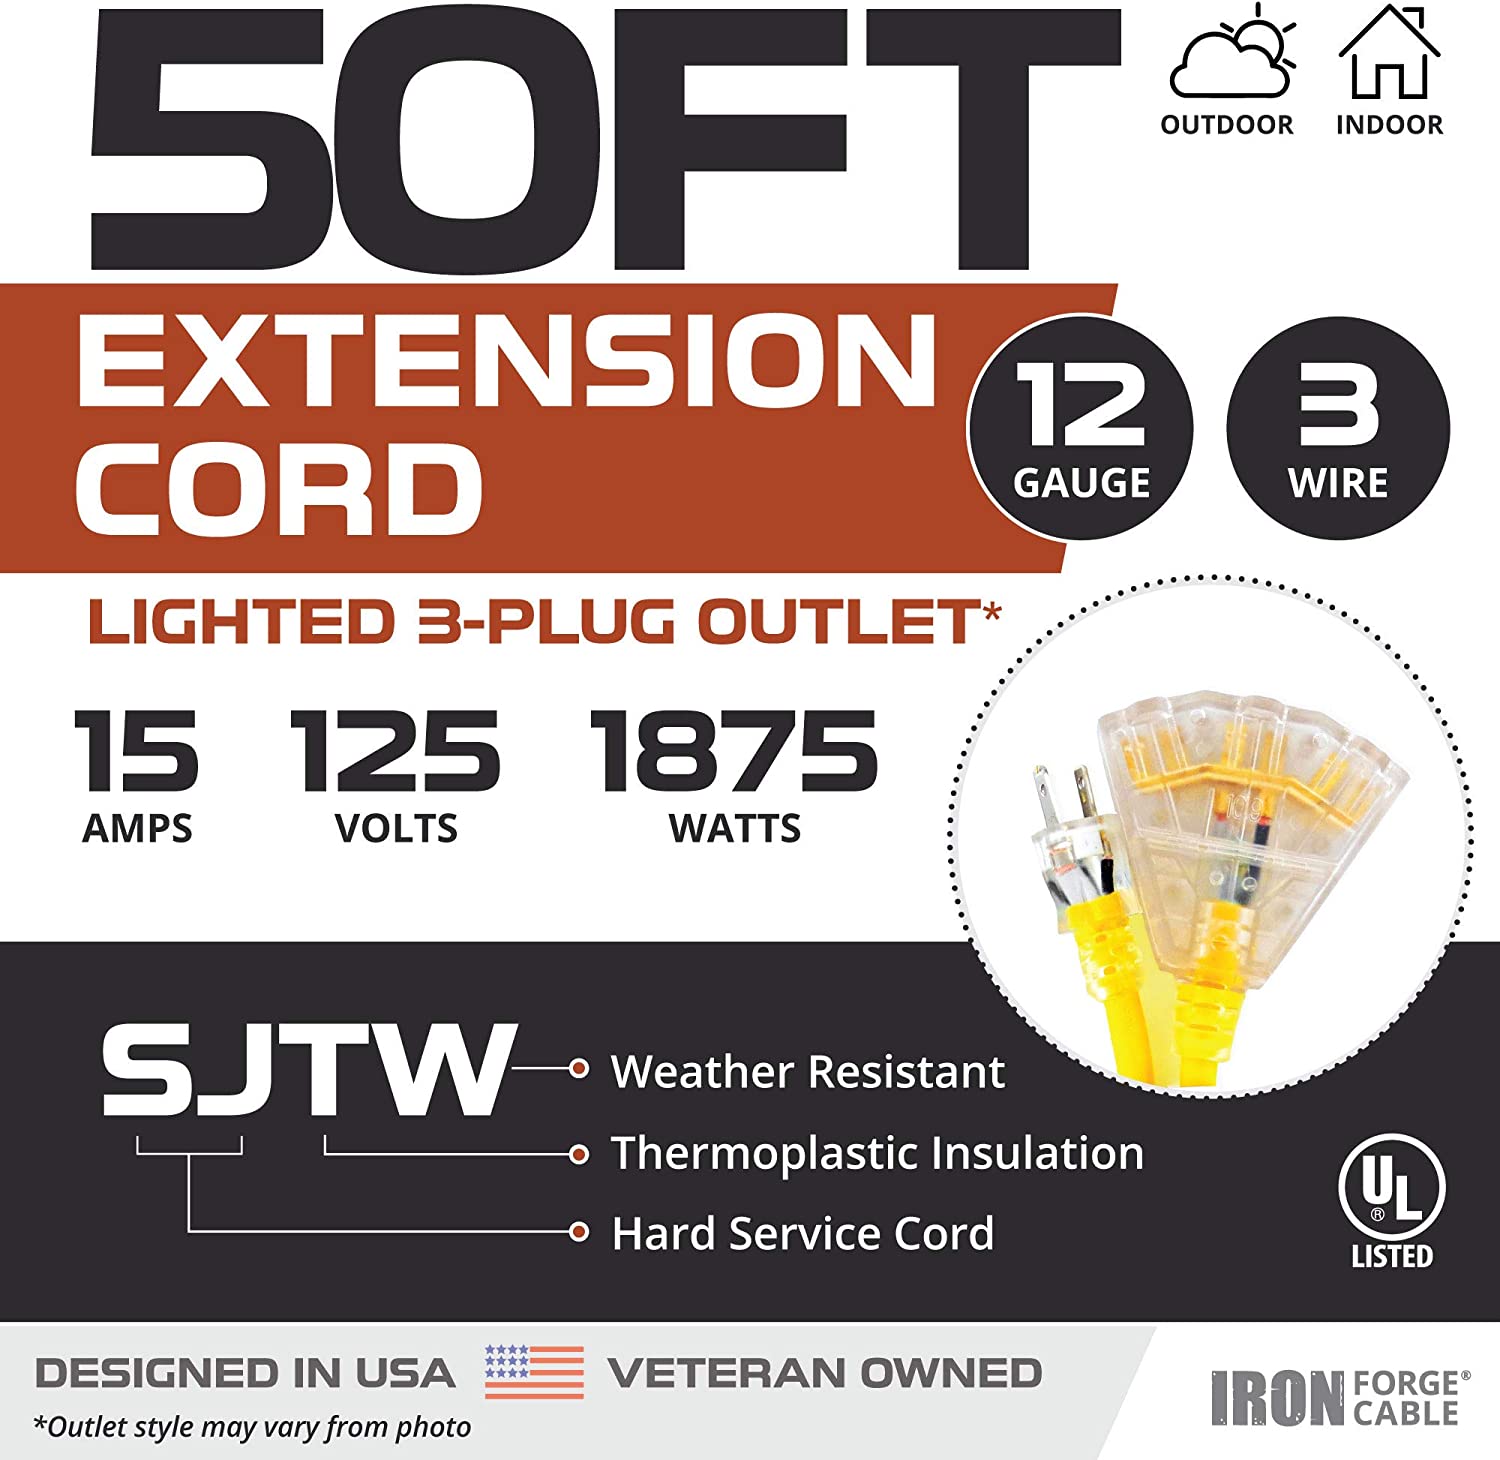 50 Foot Lighted Outdoor Extension Cord with 3 Electrical Power Outlets -  iron forge tools